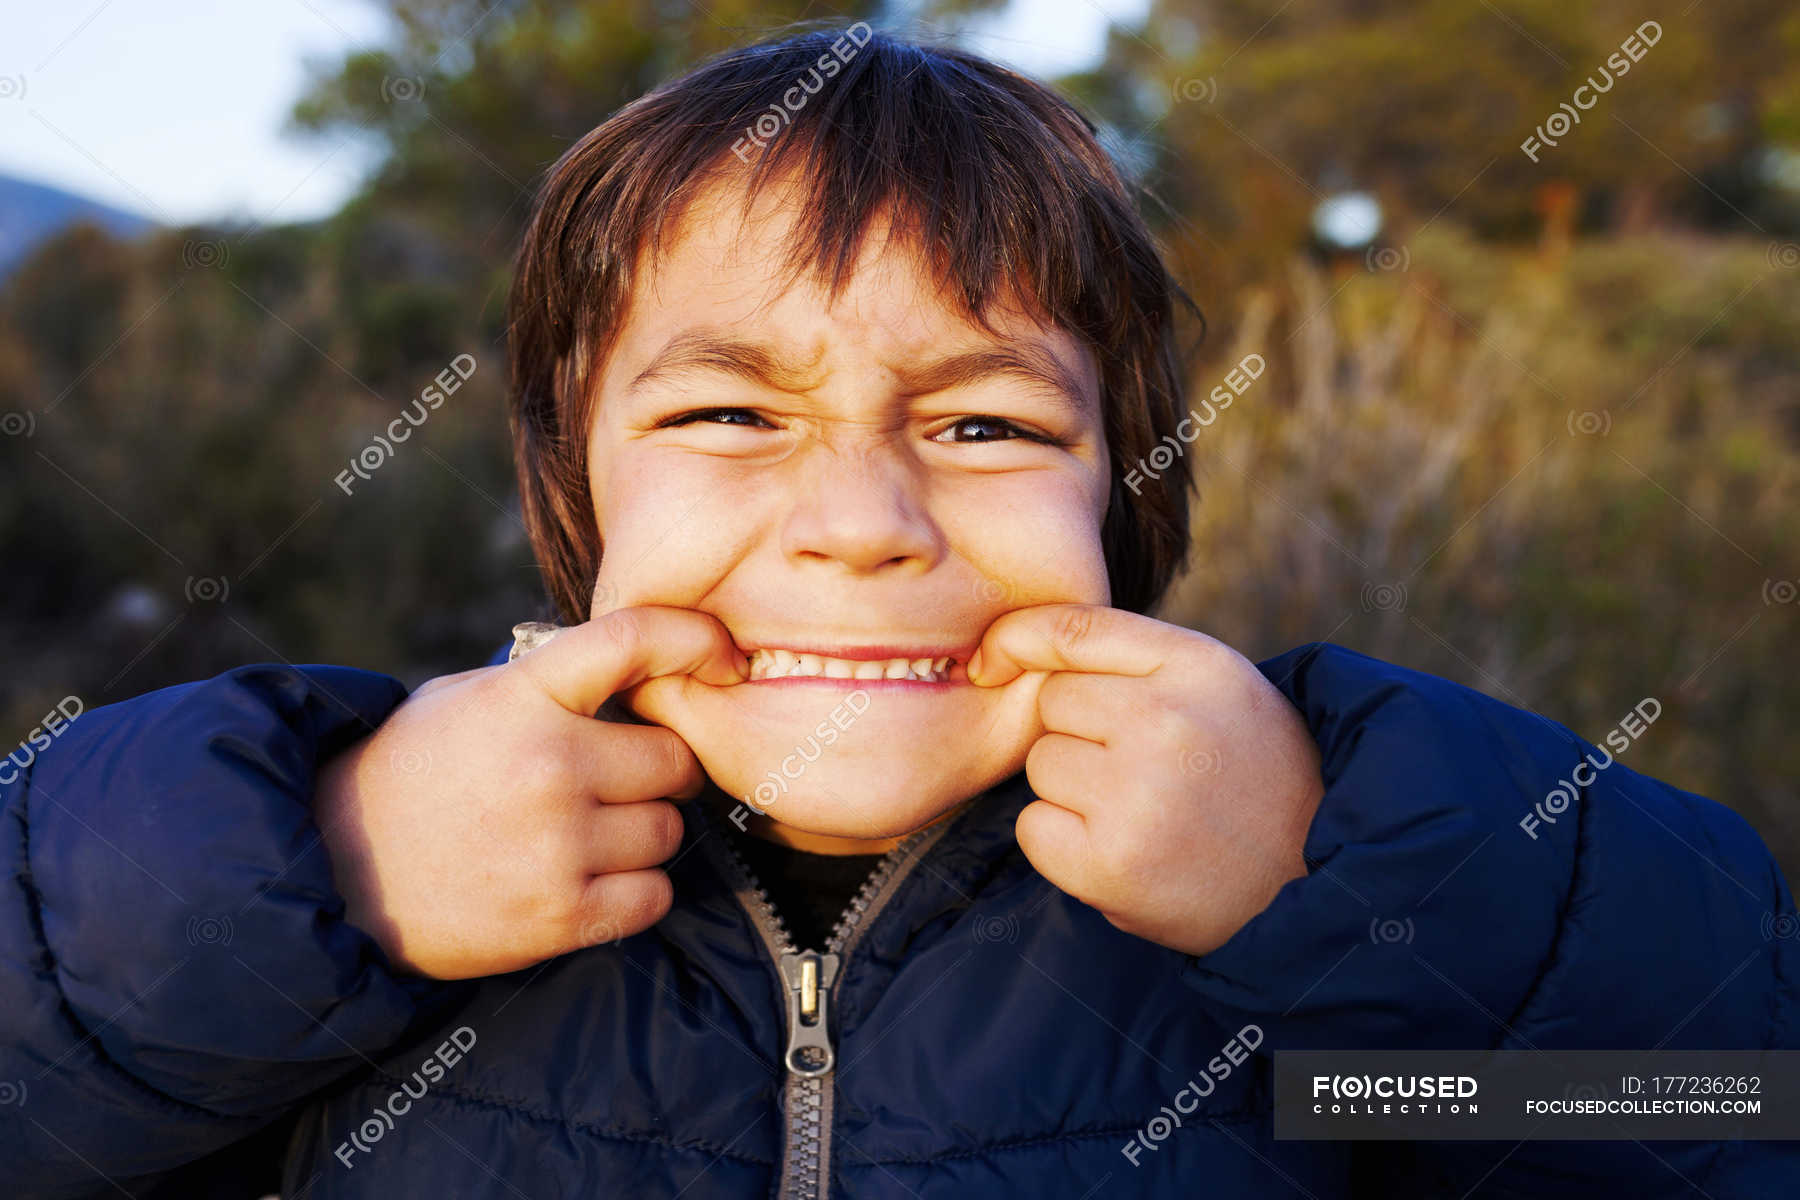 Portrait of little boy pulling funny faces — nature, child - Stock Photo |  #177236262